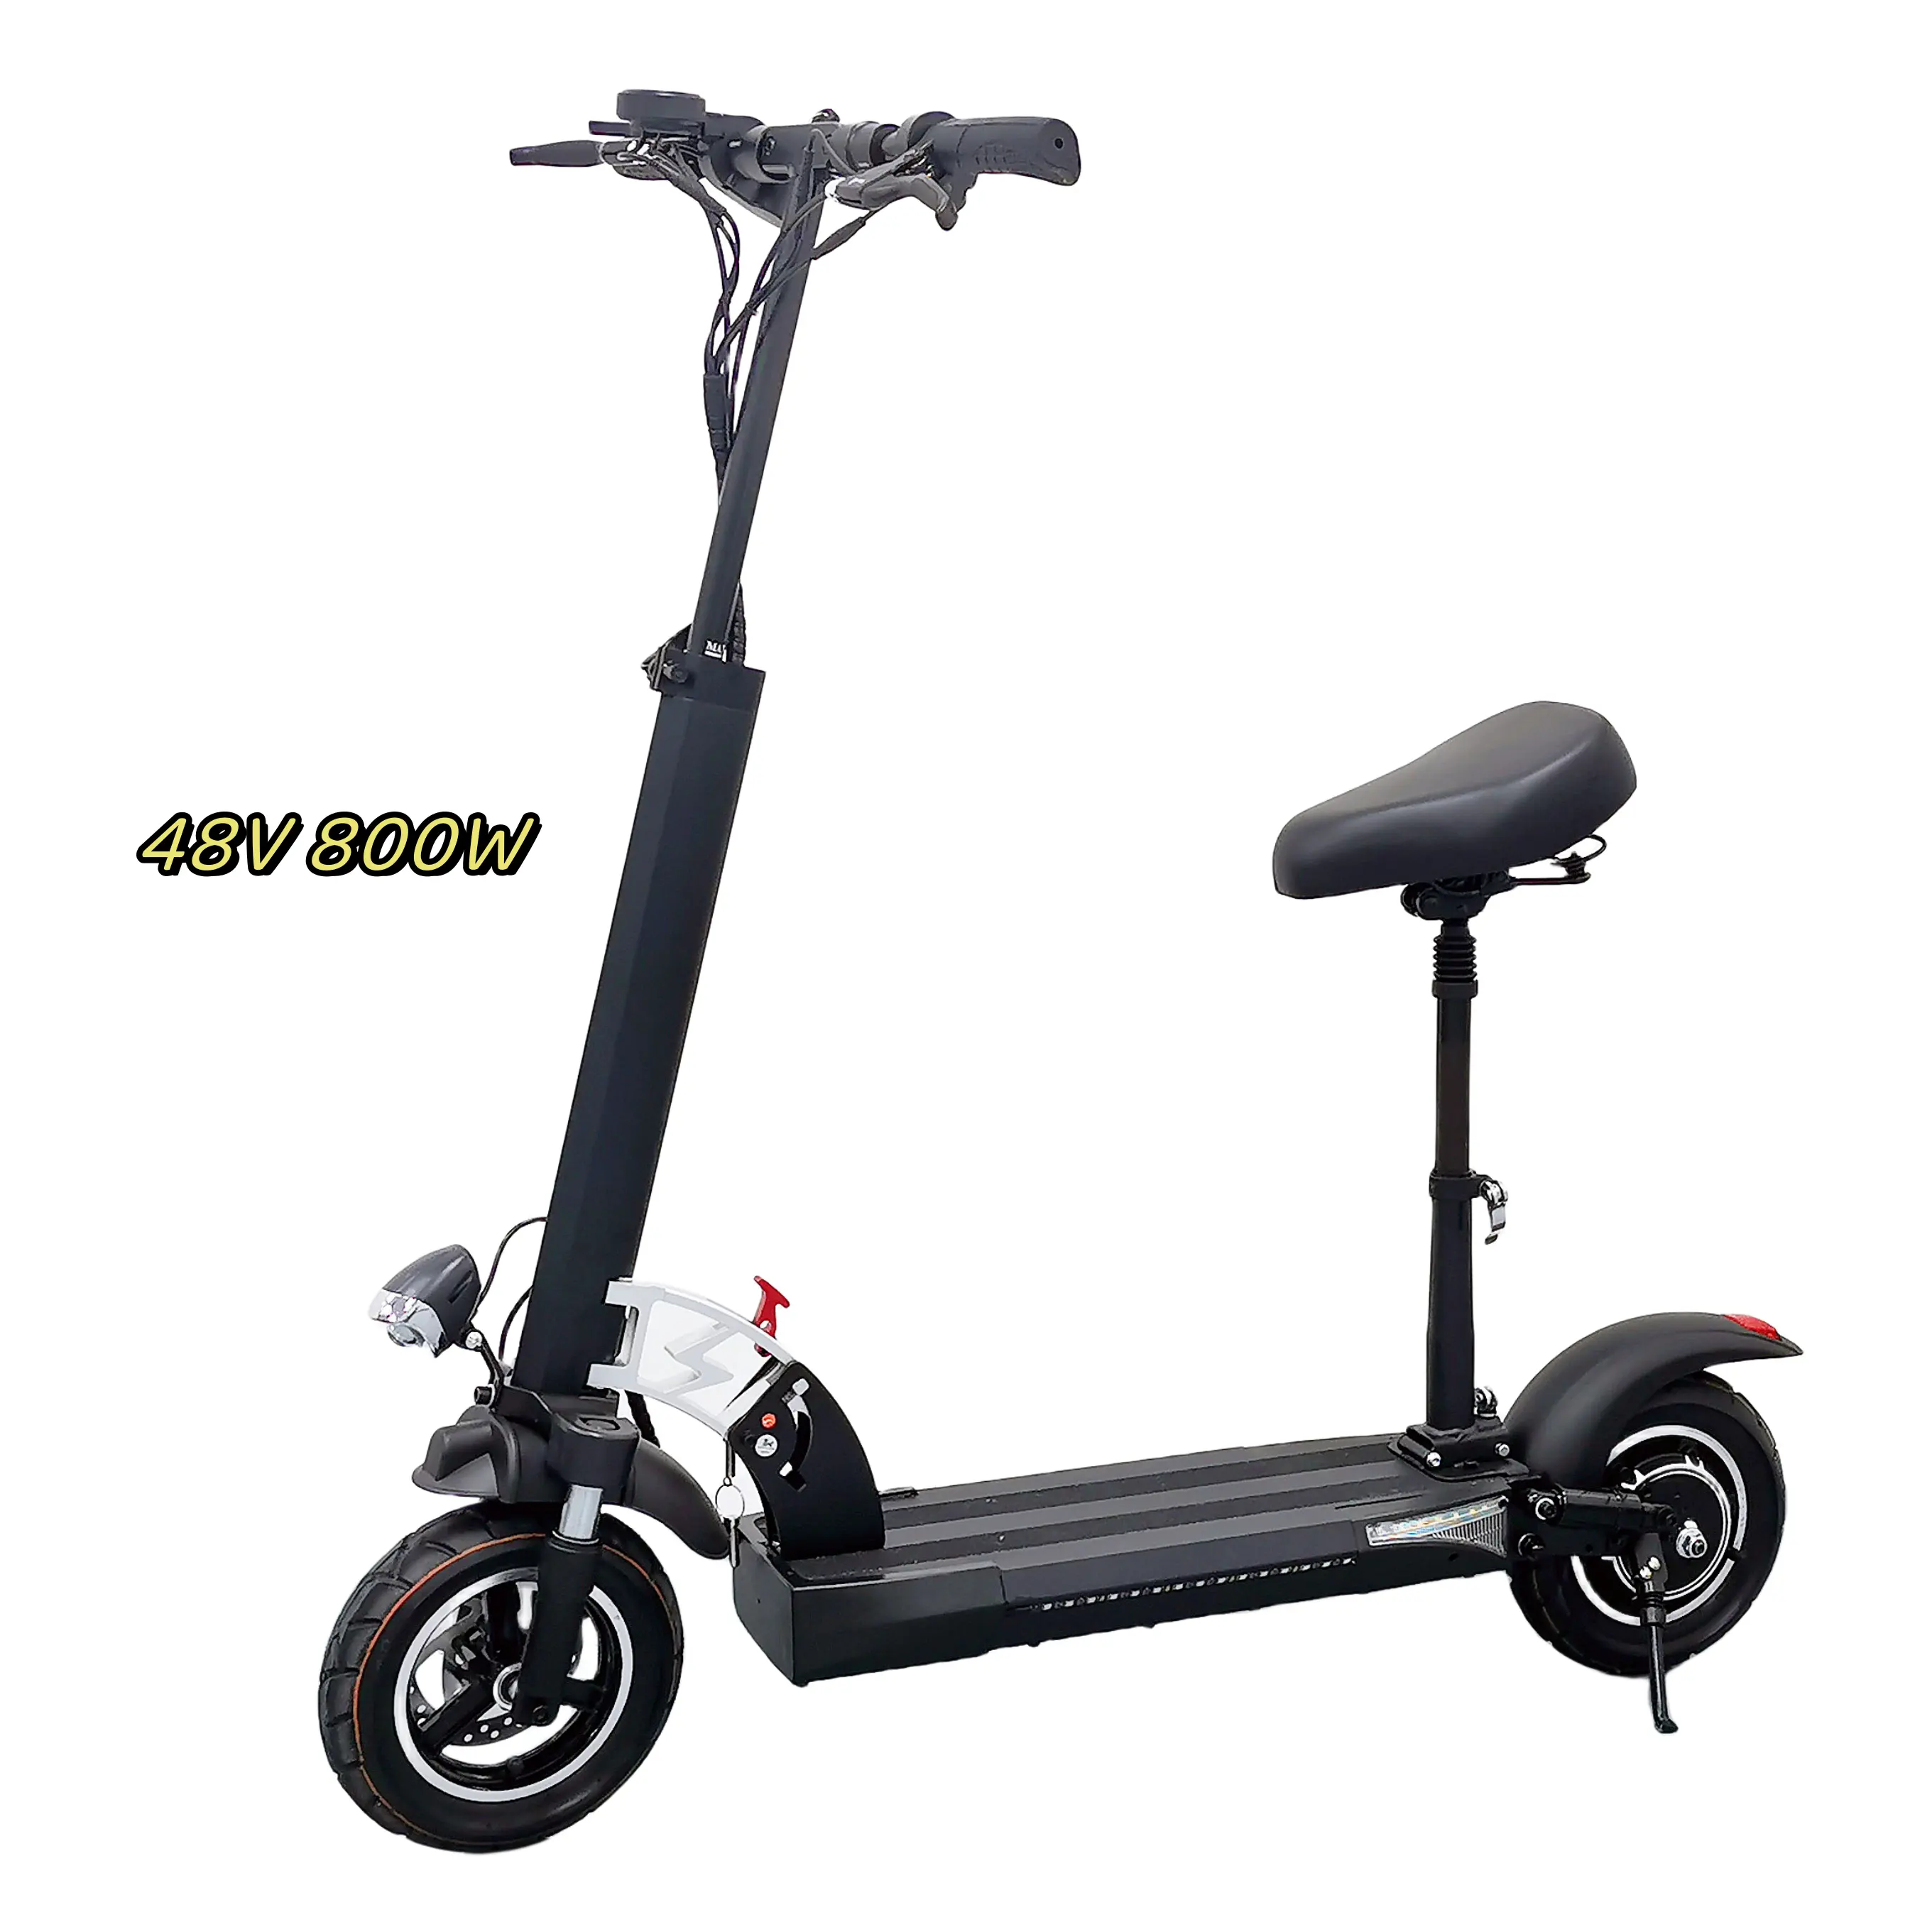 European stock 800w rear motor 48v 15Ah lithium battery 10 inch air tires electric scooters 55kmh with seat for adults